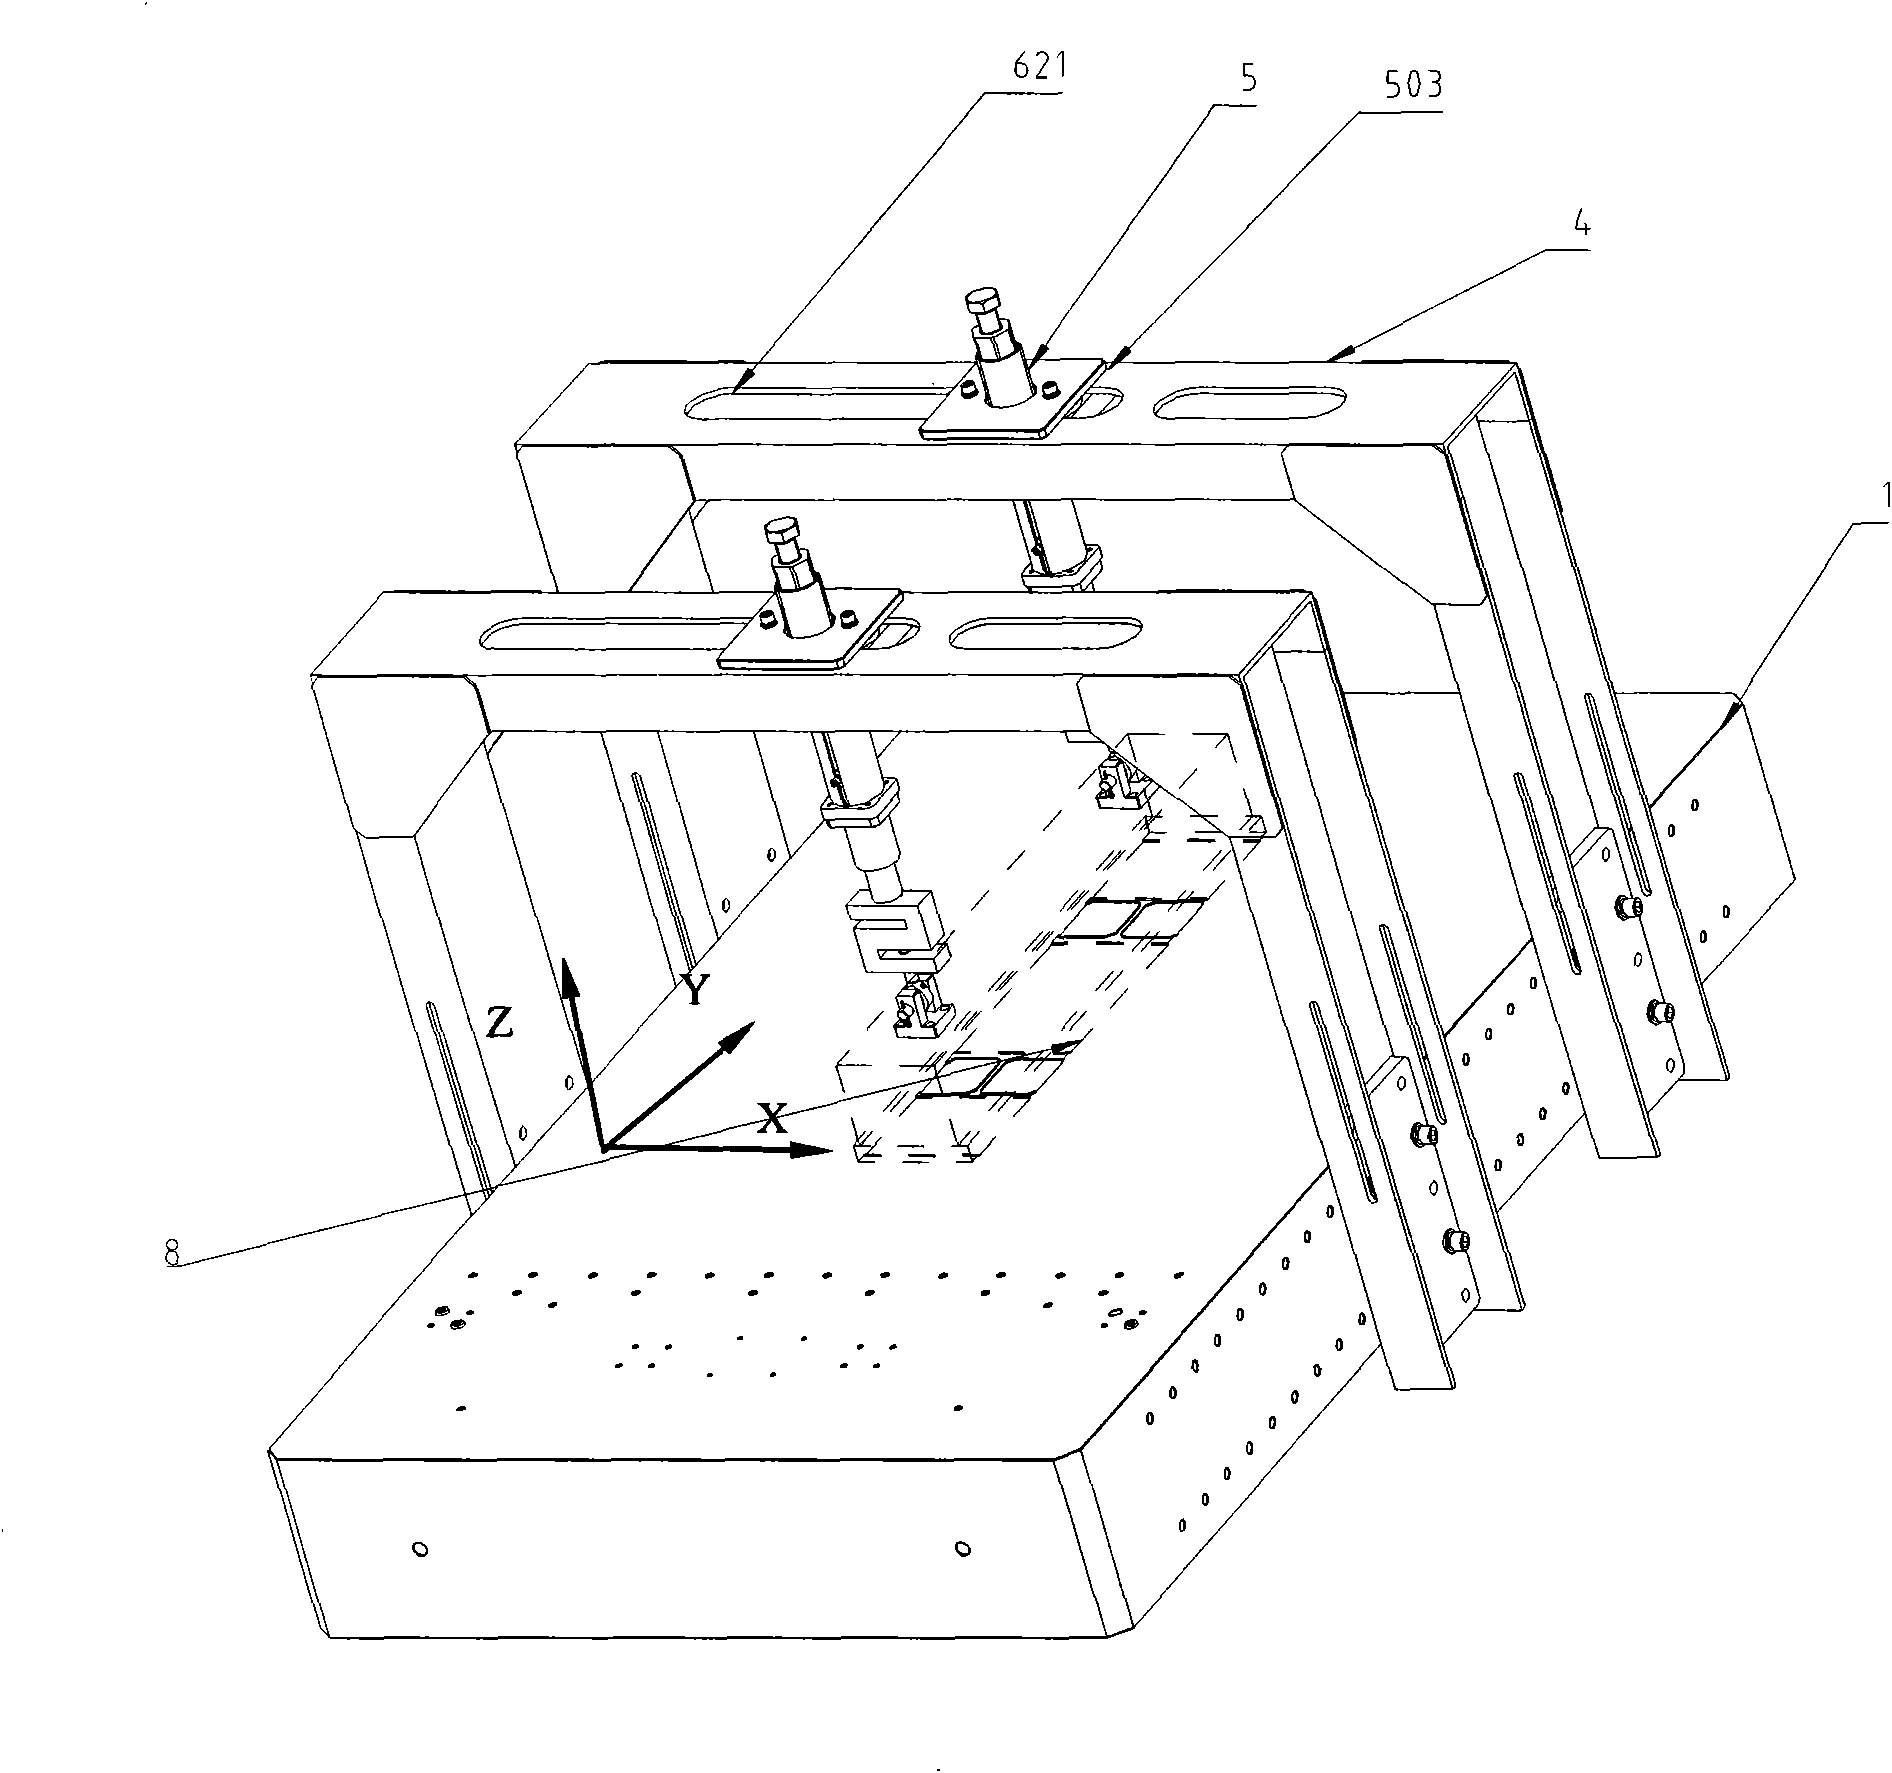 Stiffness testing device for gas bearing